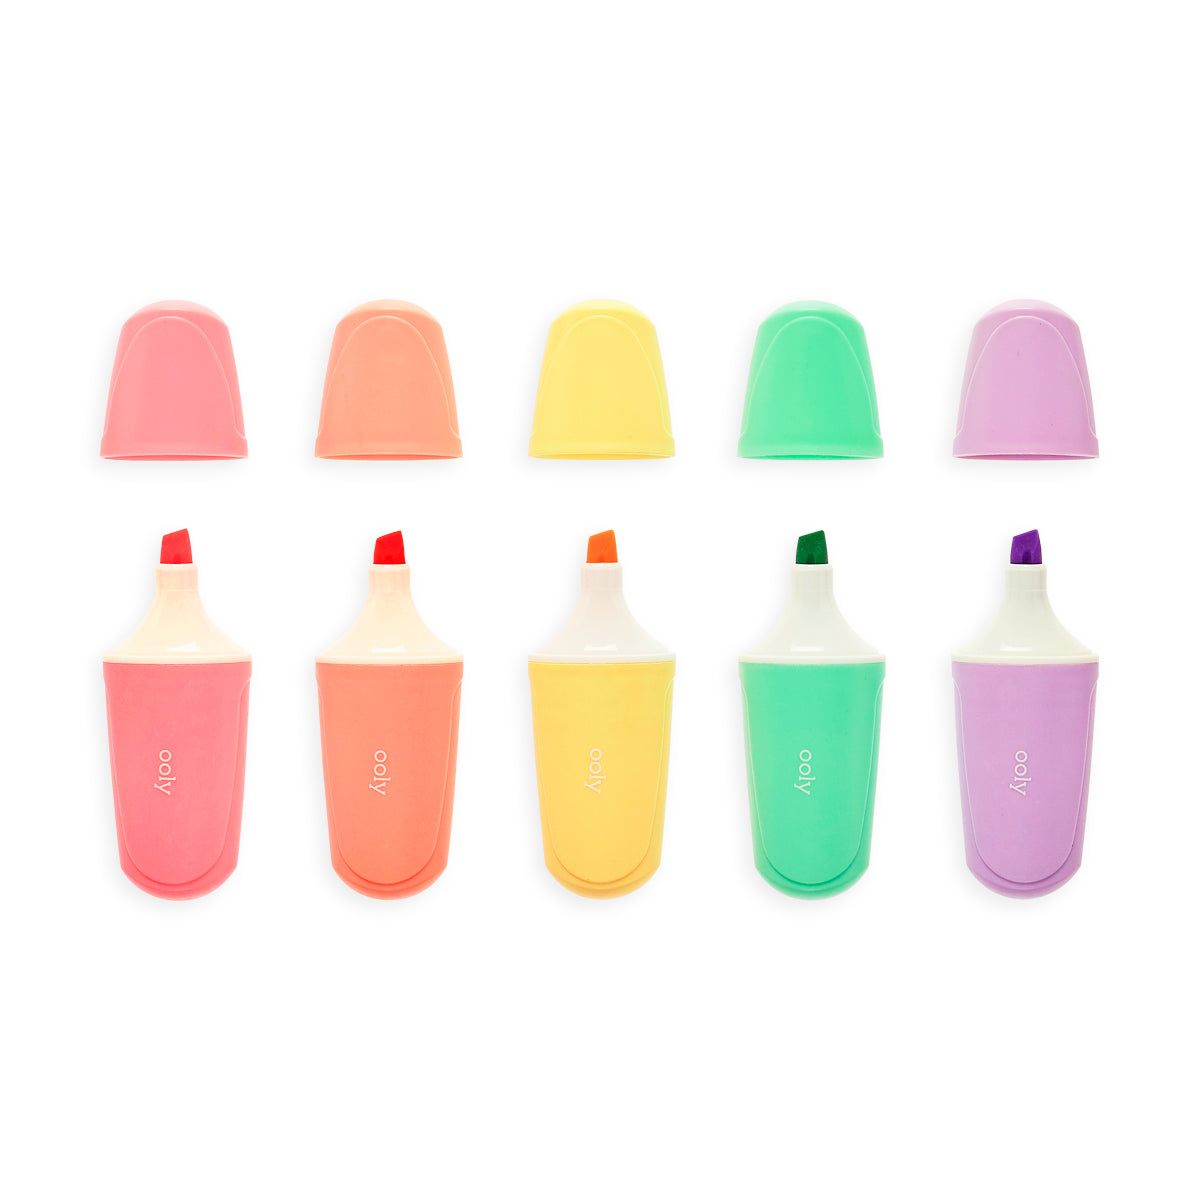 Le BonBon Patisserie Scented Pastel Highlighters - Set of 5